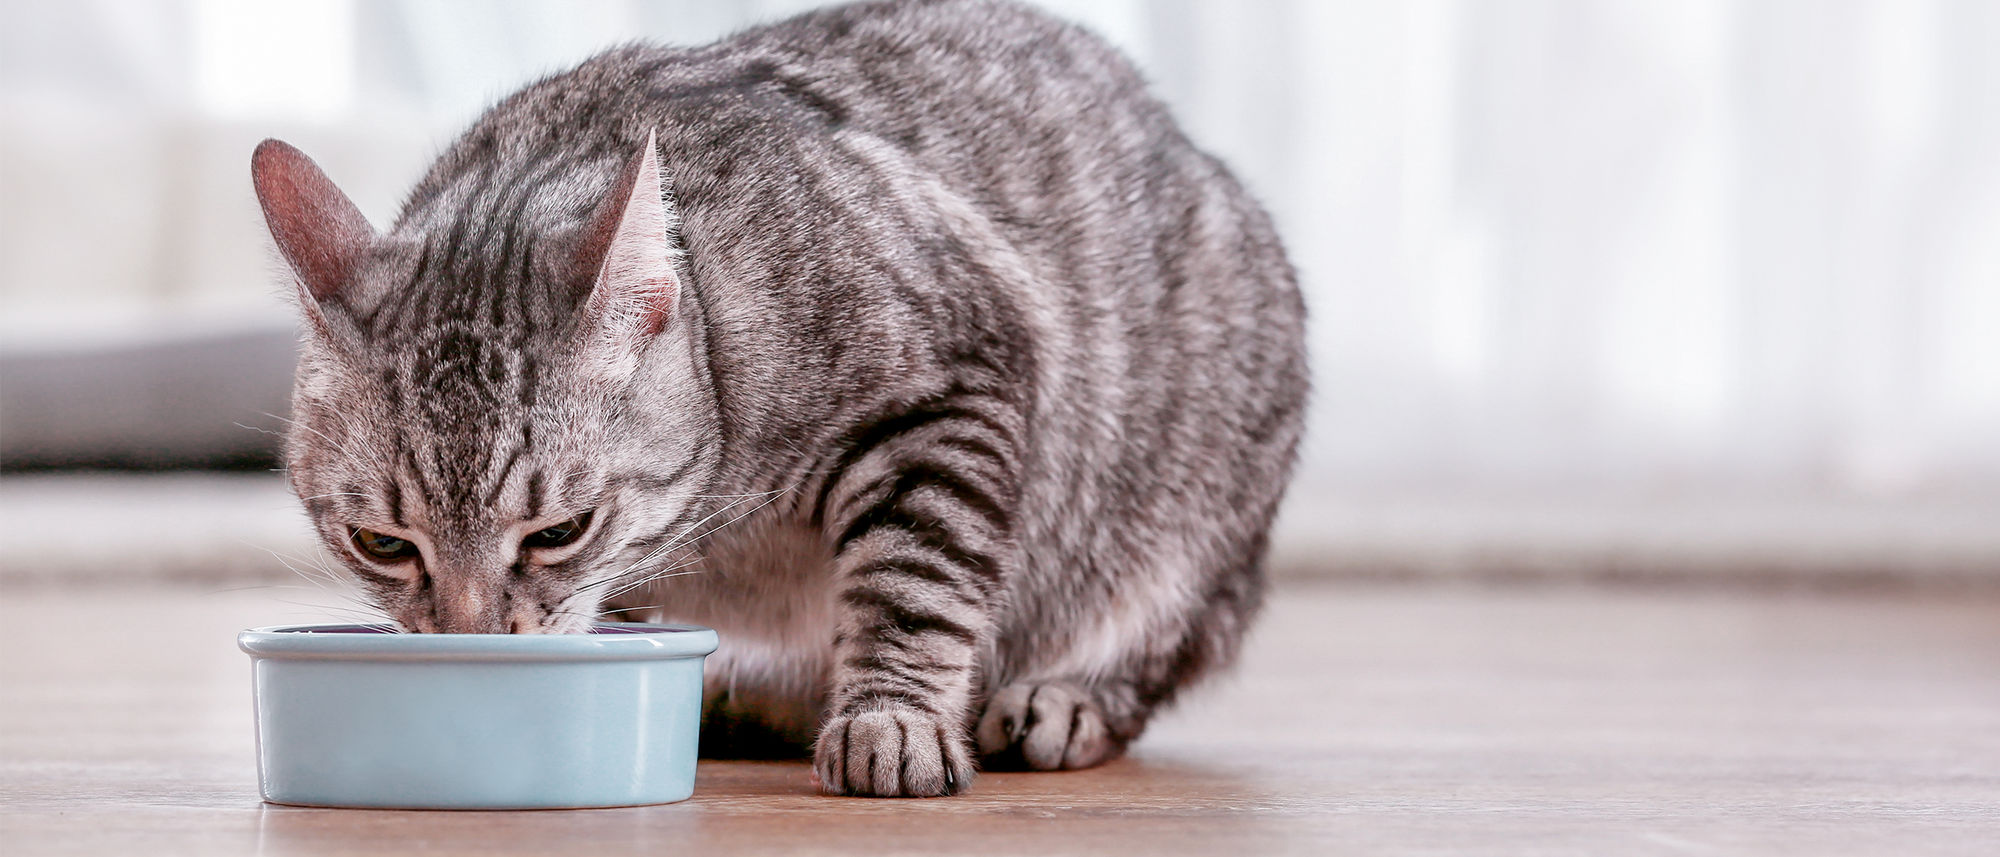 Cat eating from bowl